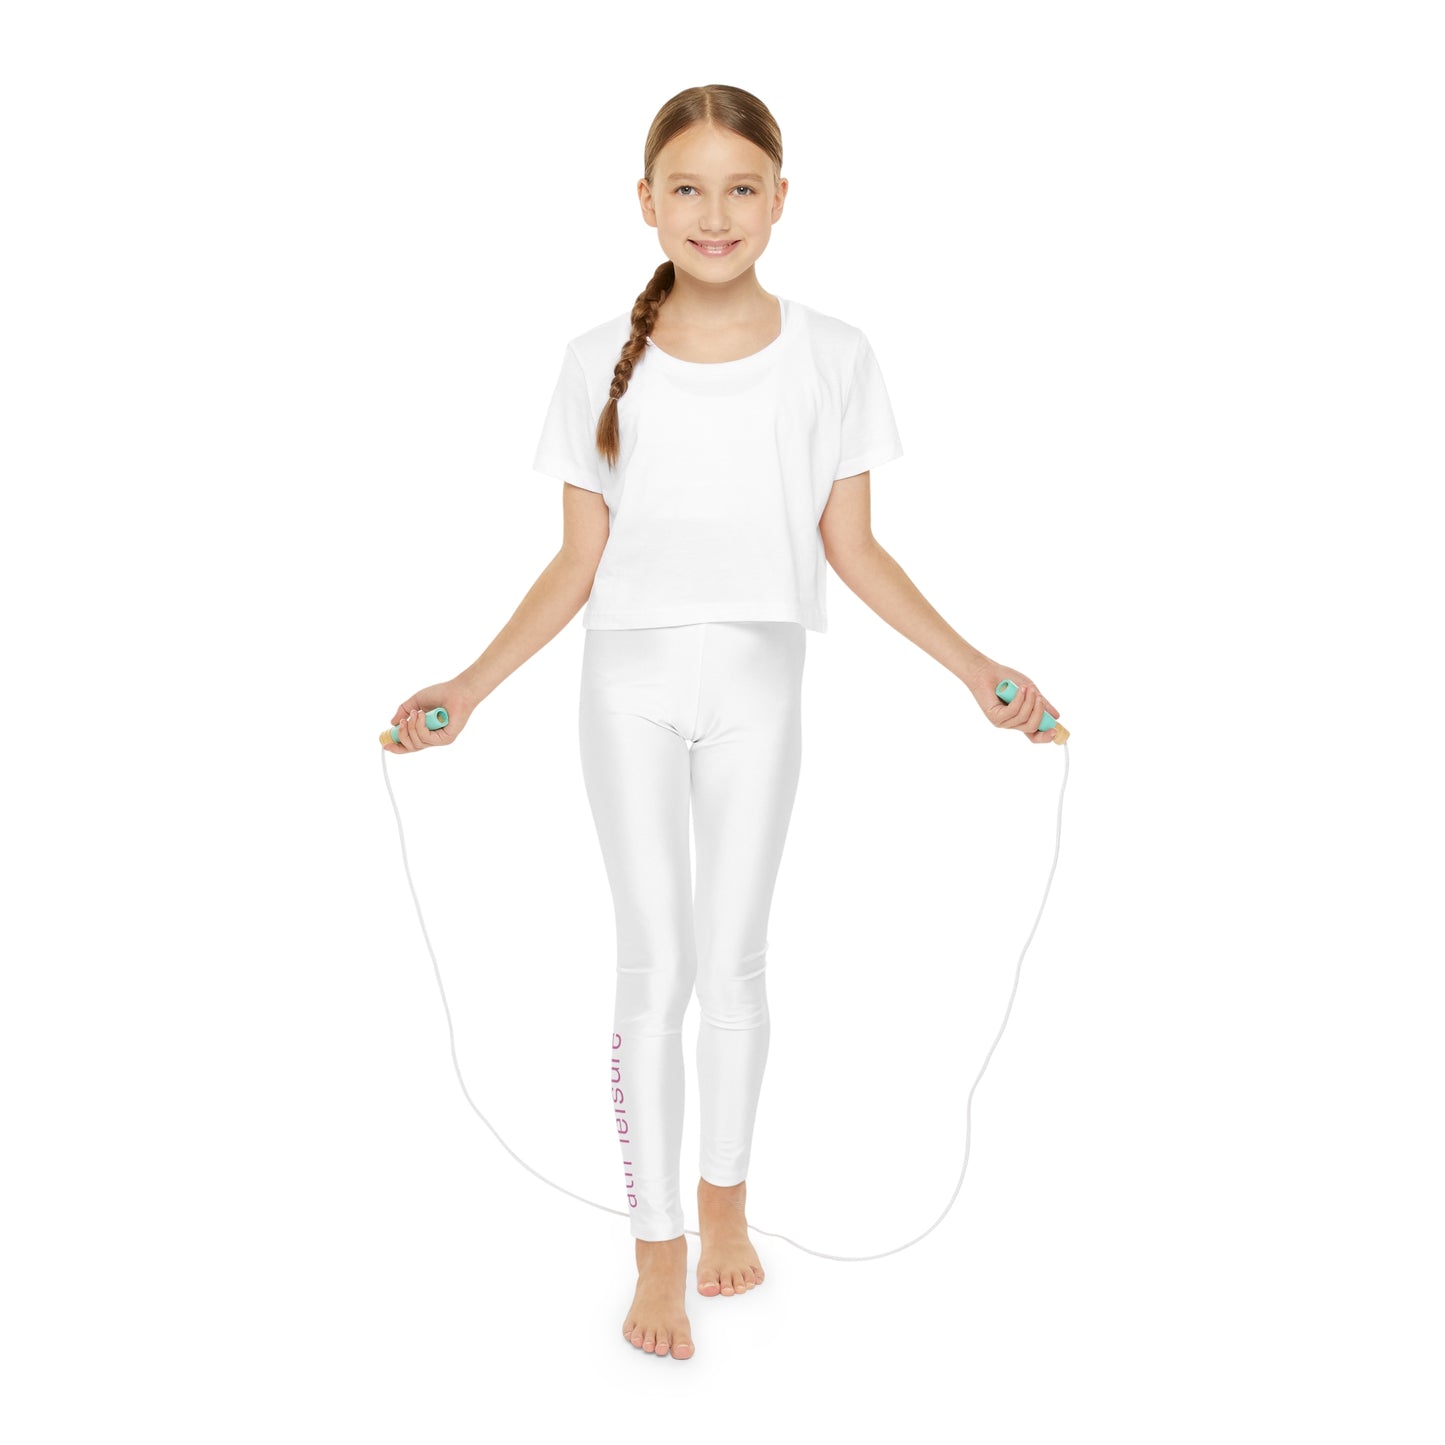 Ath"leisure" Collection- Ath"leisure" Youth Full-Length Leggings